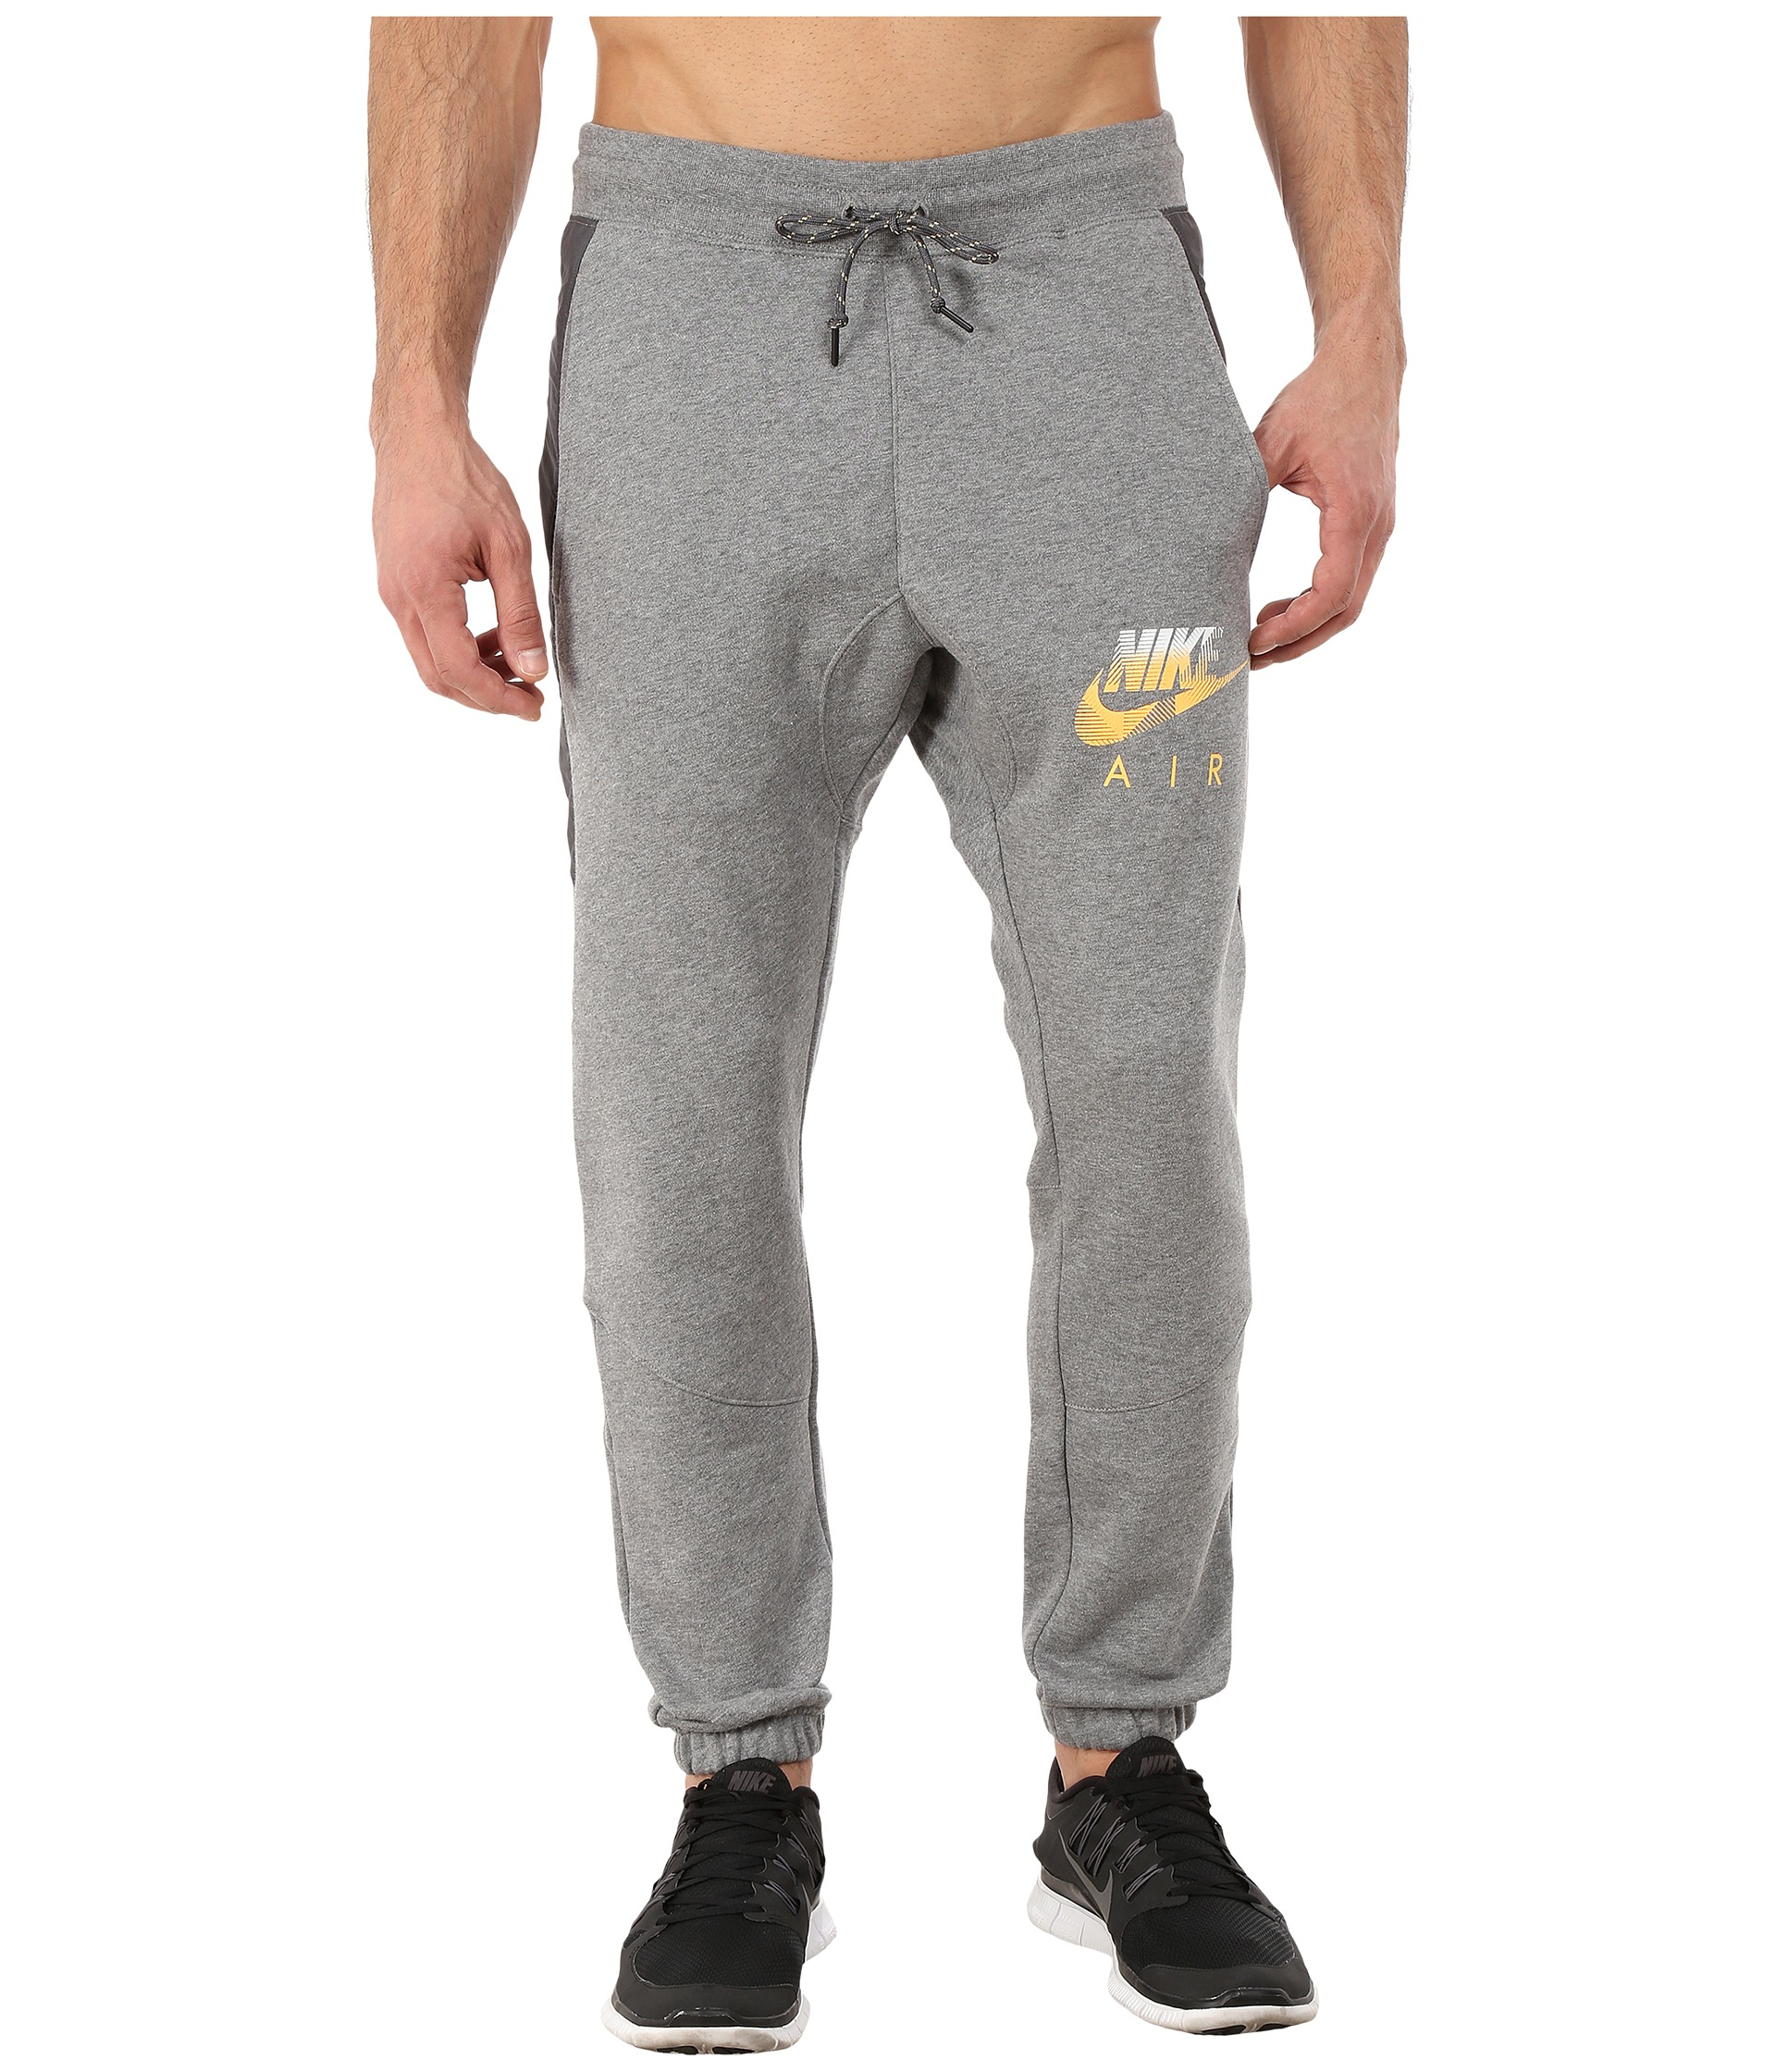 Download Nike Aw77 Fleece Cuff Pants Hybrid in Gray for Men (Carbon ...